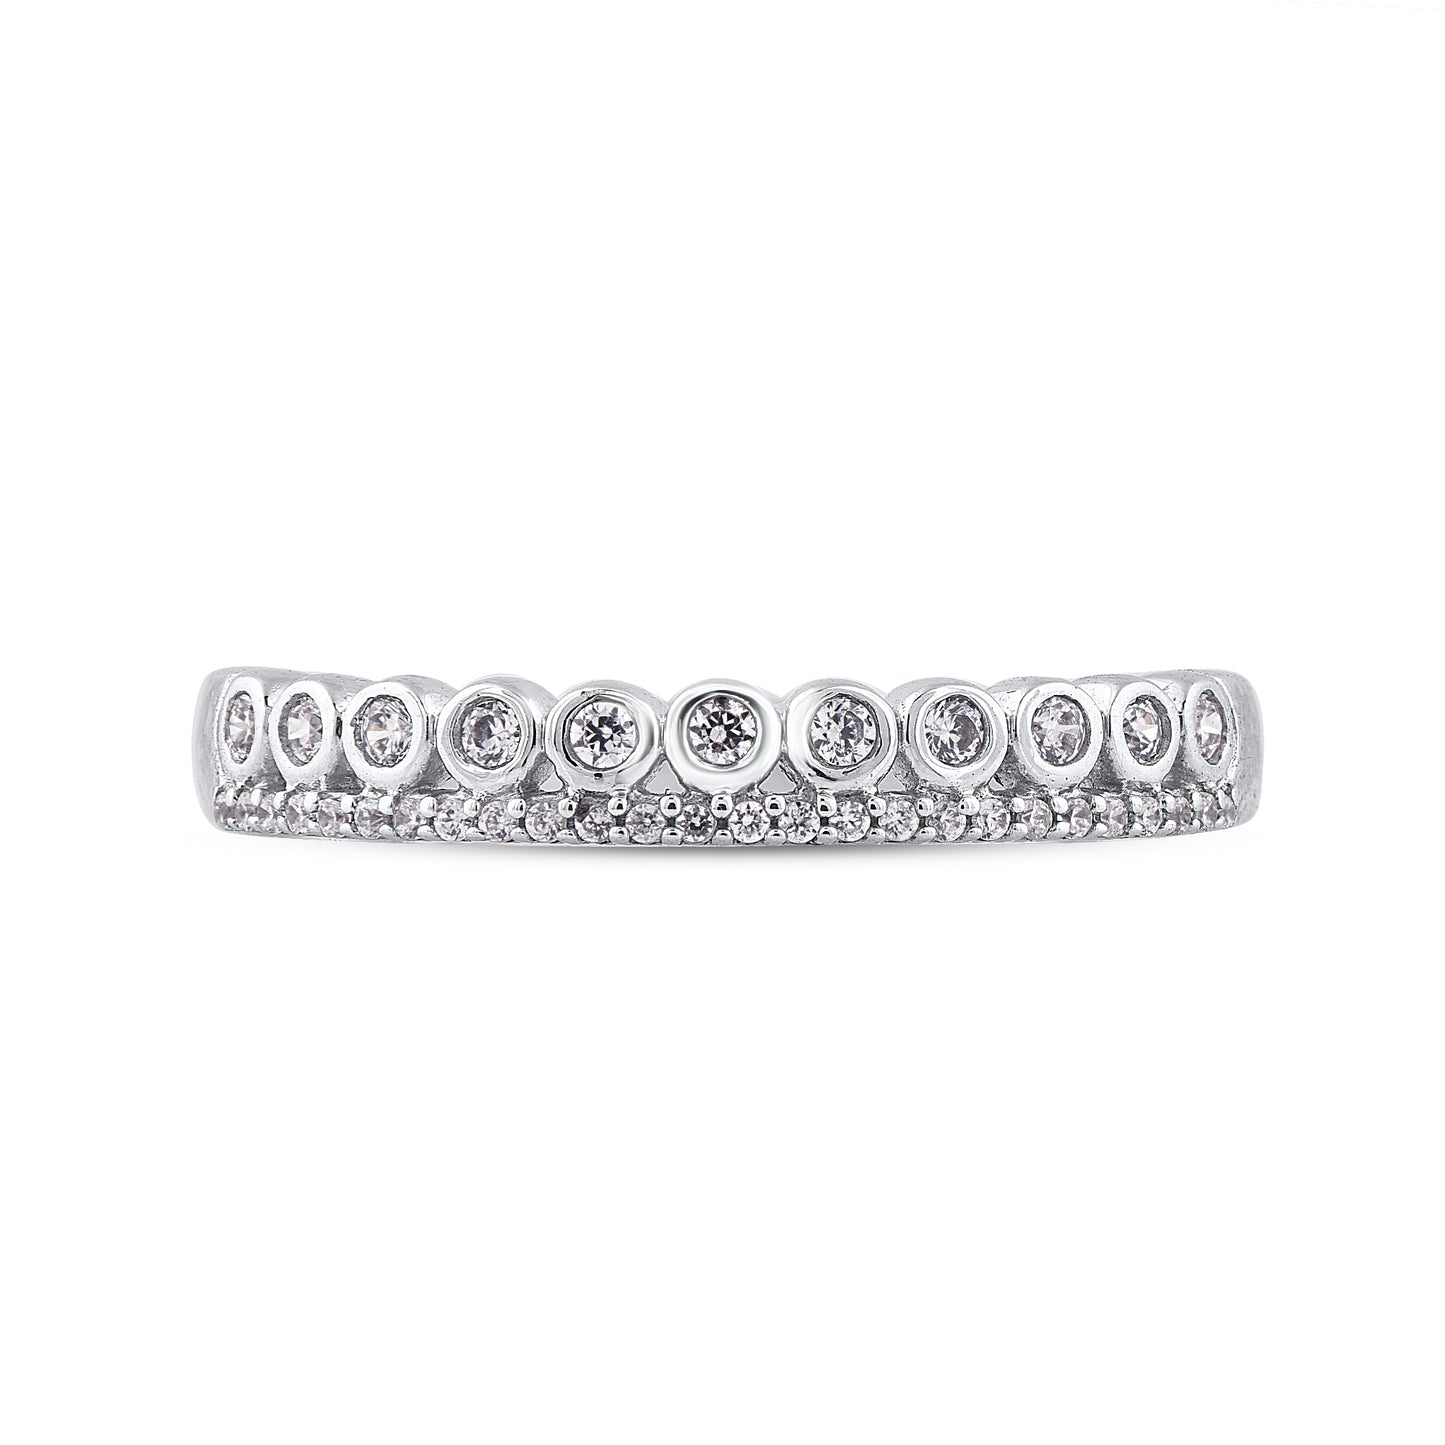 Round Diamond Double Row Band Ring in .925 Sterling Silver